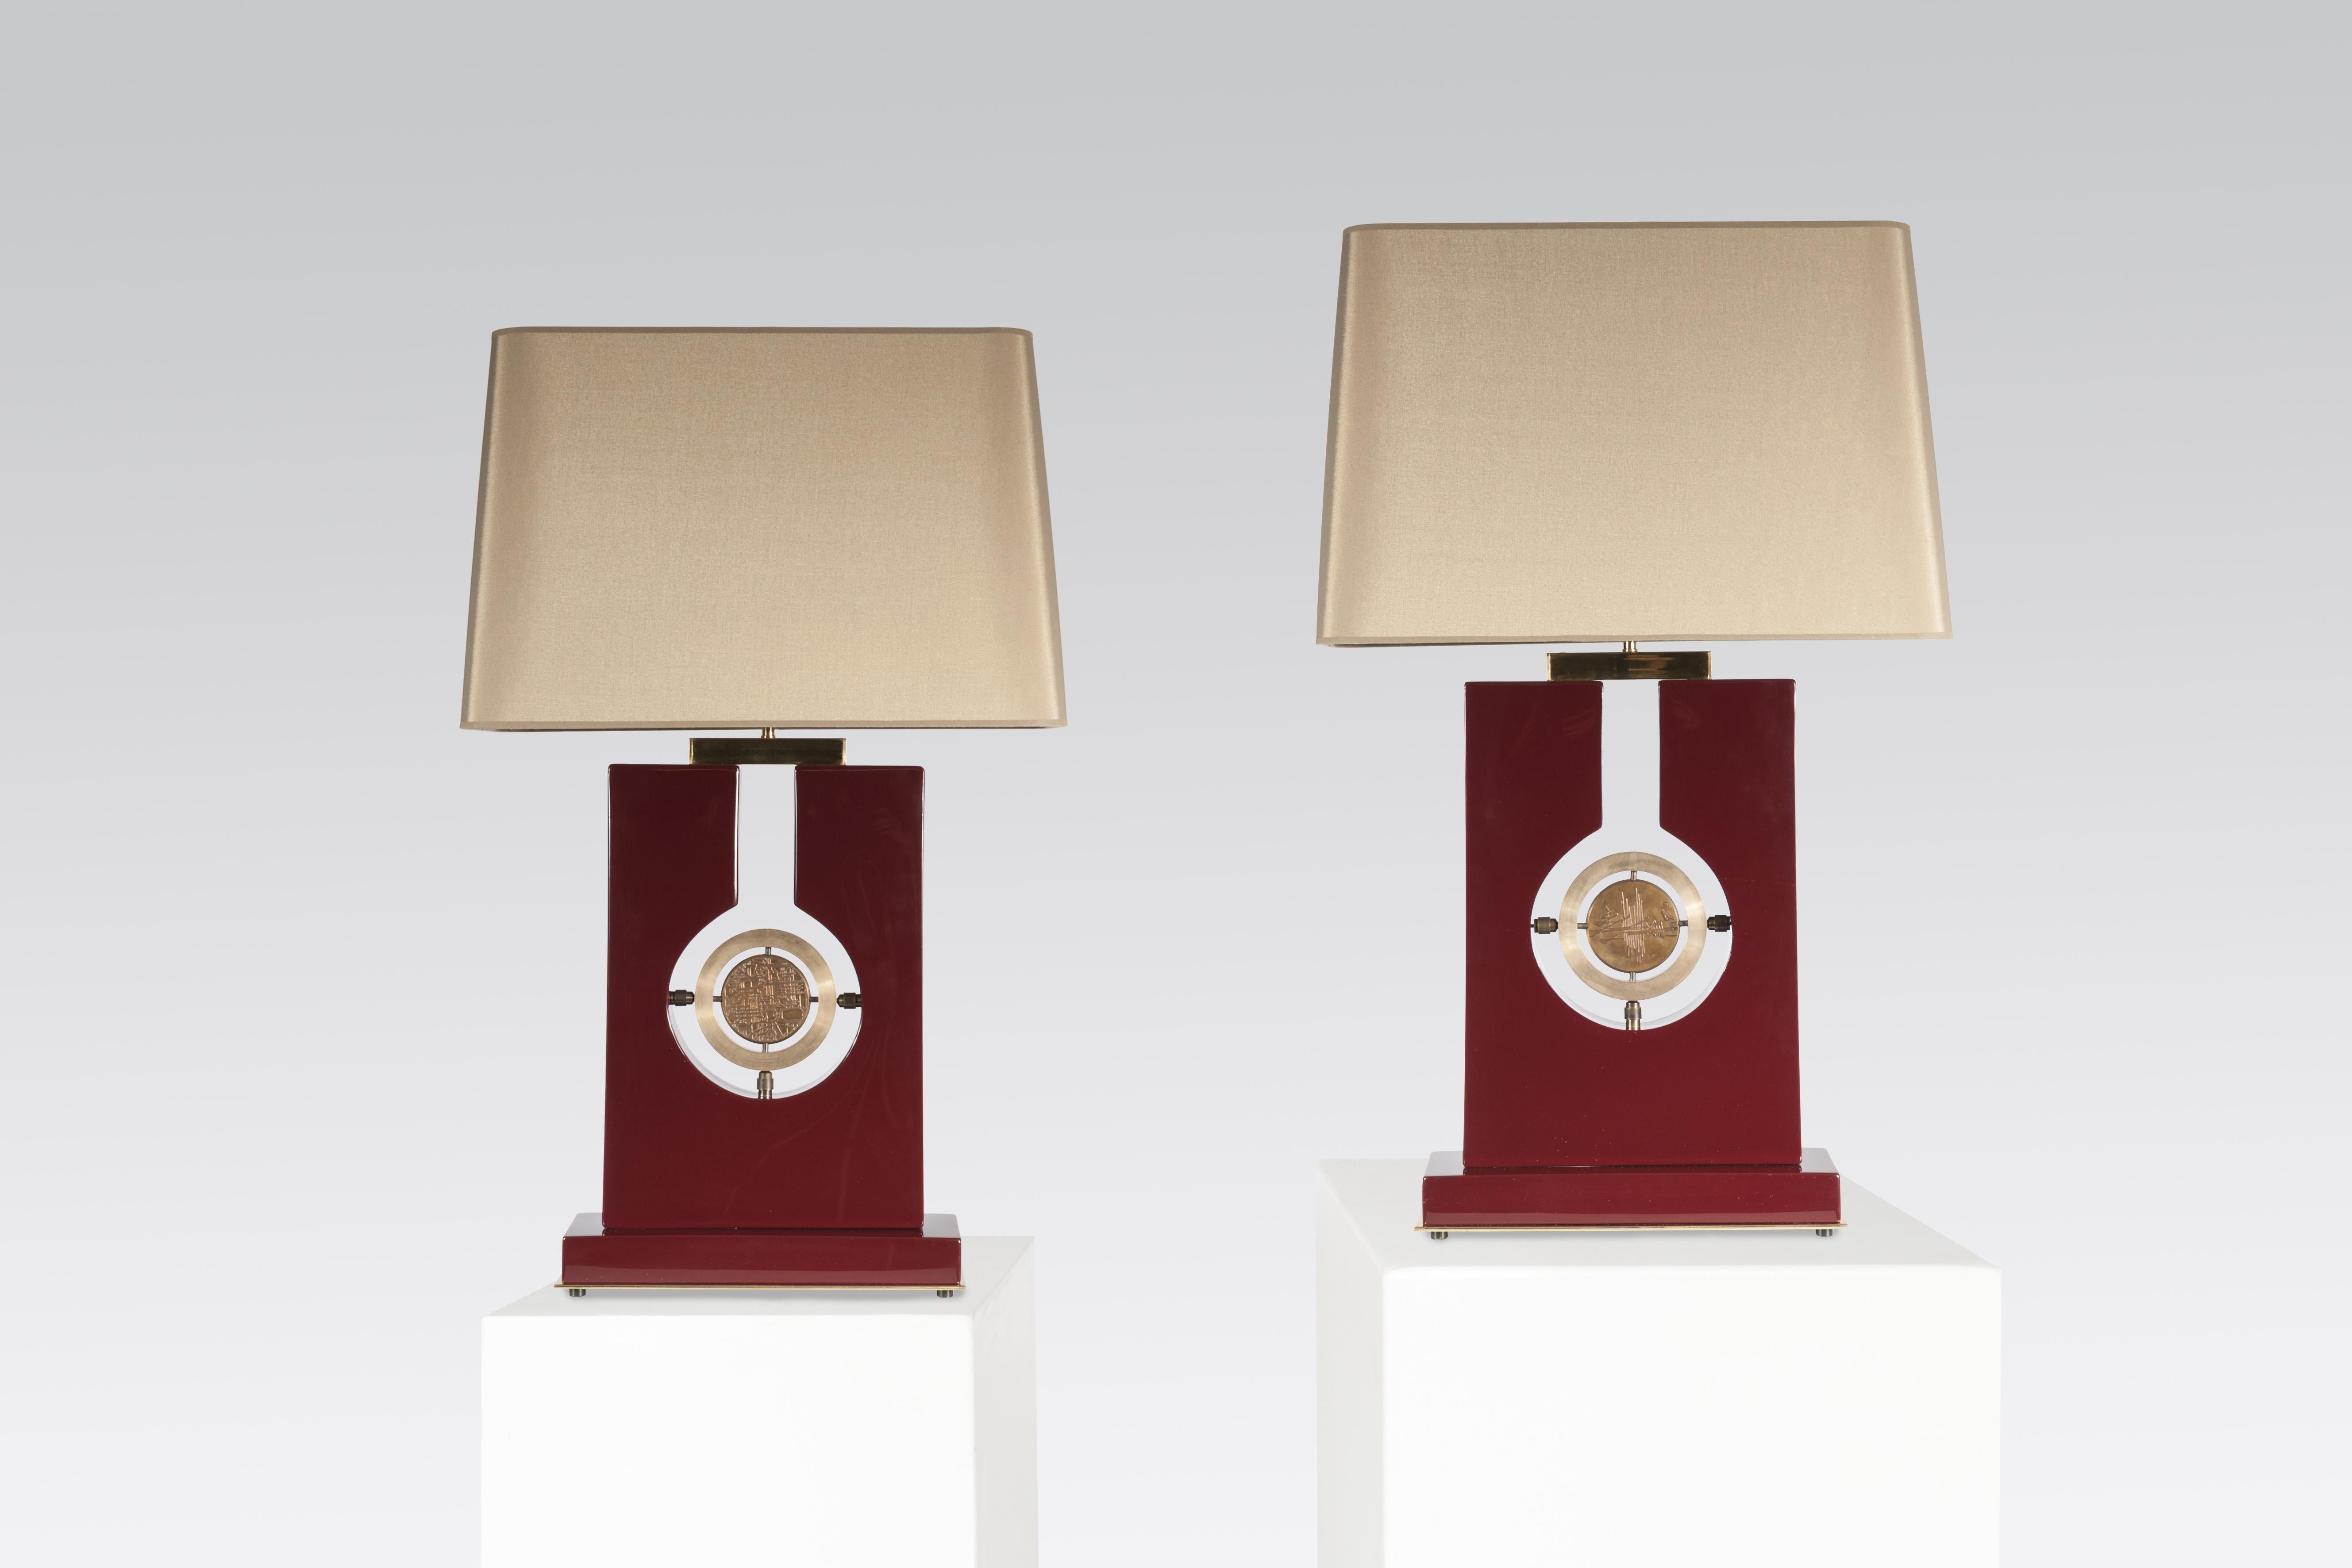 Created to measure by Stan Usel, this pair of burgundy resin, table lamps topped with a medal bronze by Georges Mathieu, a tribute to Georges Mathieu. Each piece is set with a bronze medal and when put together aside gives a great sense of harmony.